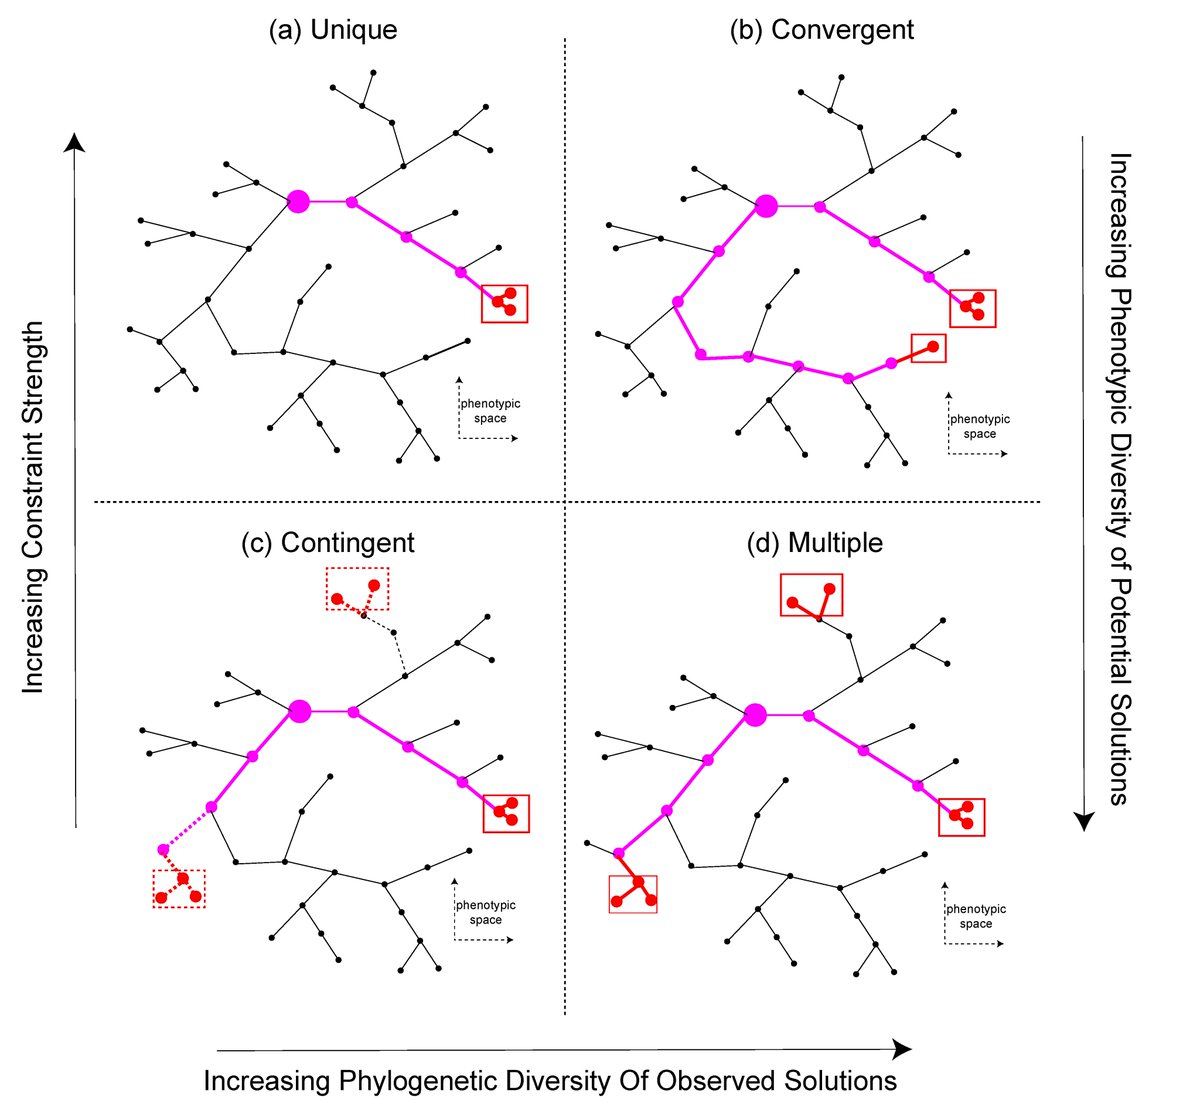 12/ When task-optimized NN models match neural data, this is probably not a miracle: it is likely because the constraints on both the model and the real organism have lead to convergent evolution.